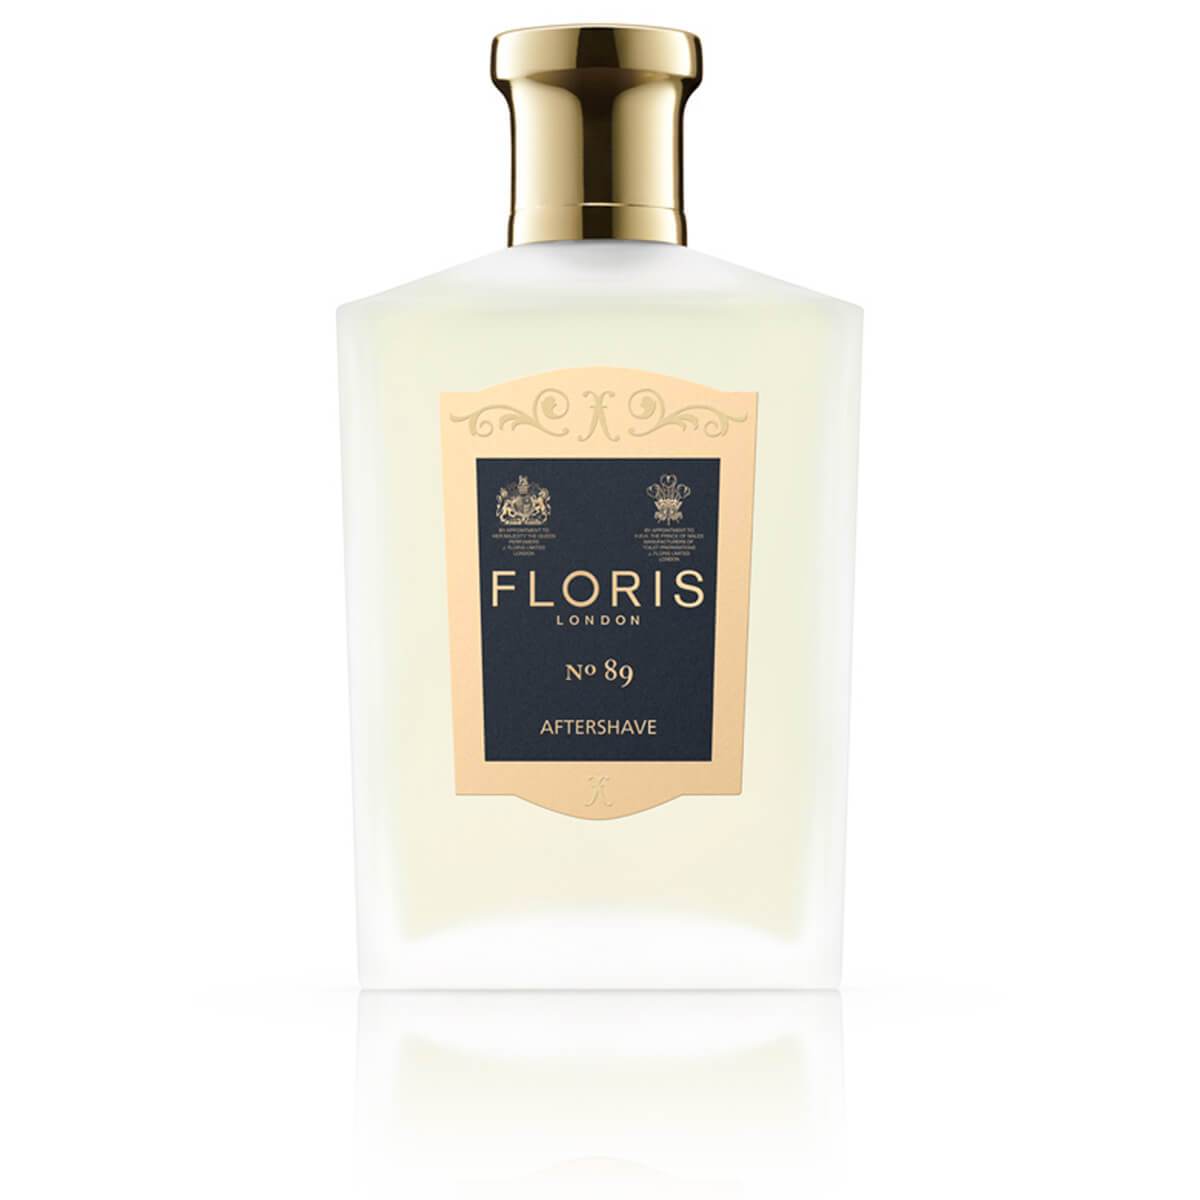 Floris London no.89 Aftershave frosted bottle with label